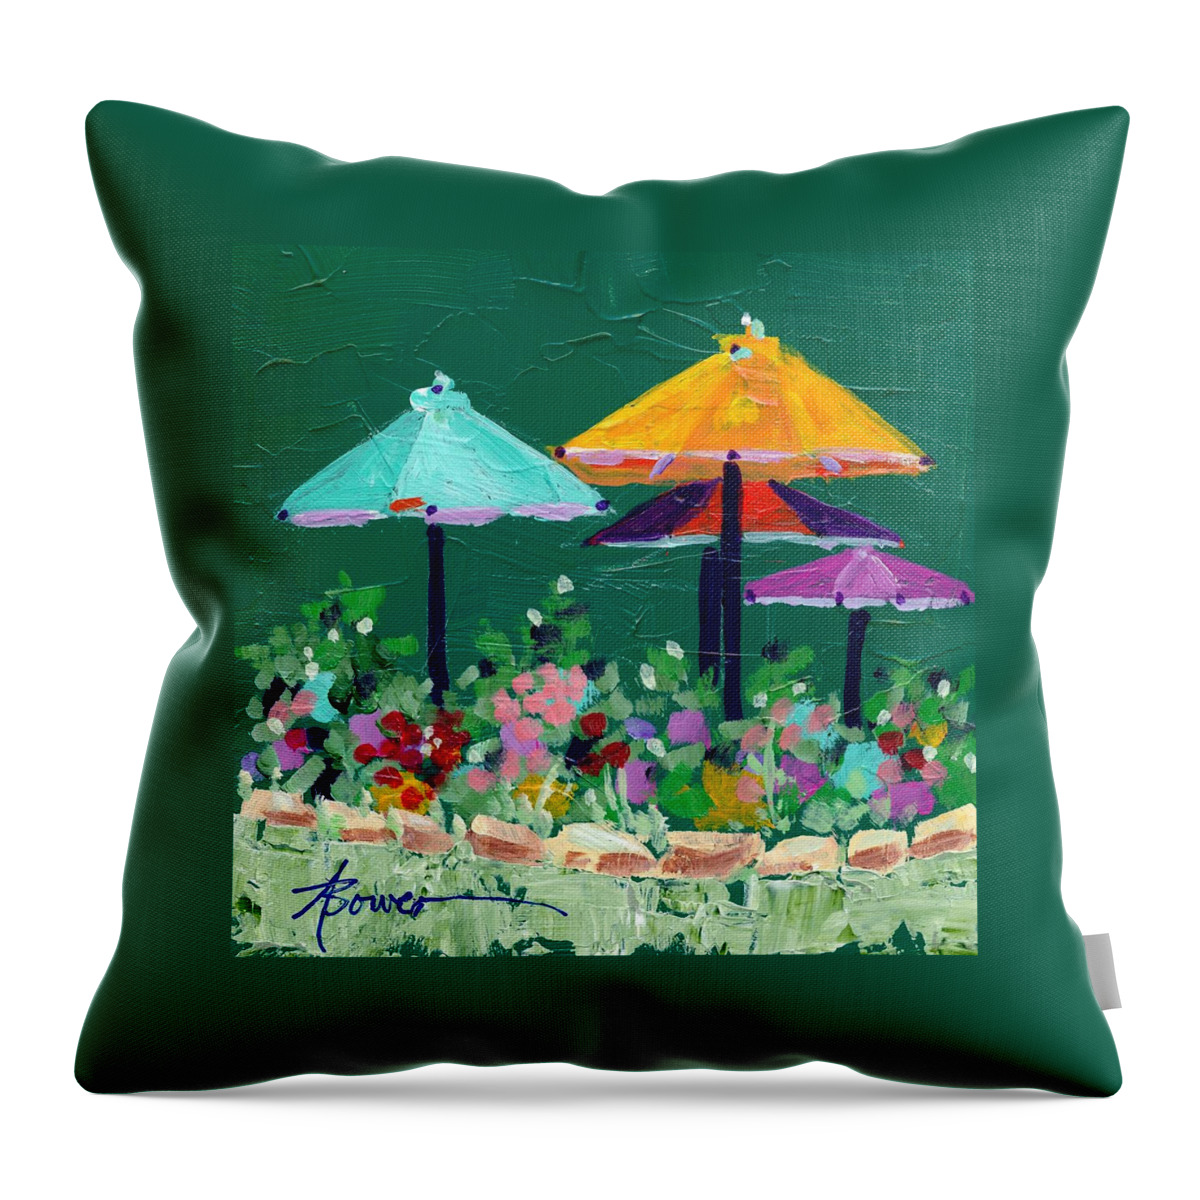 Umbrellas Throw Pillow featuring the painting Meet Me At The Cafe by Adele Bower